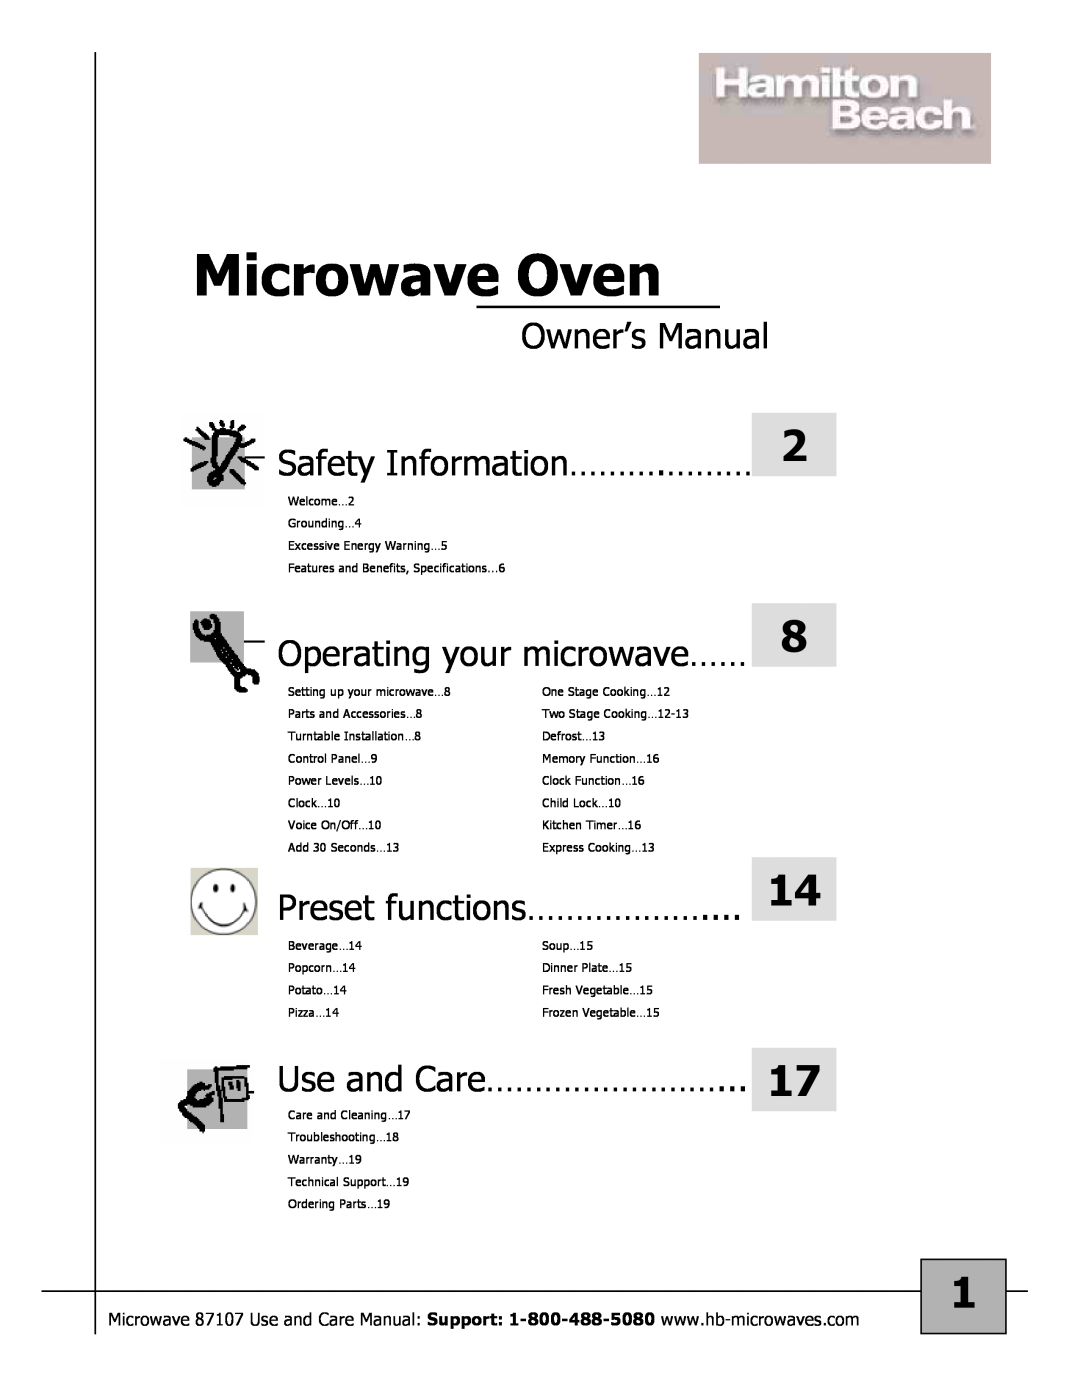 Hamilton Beach 87107 owner manual Operating your microwave……, Preset functions………………, Use and Care……………………, Microwave Oven 